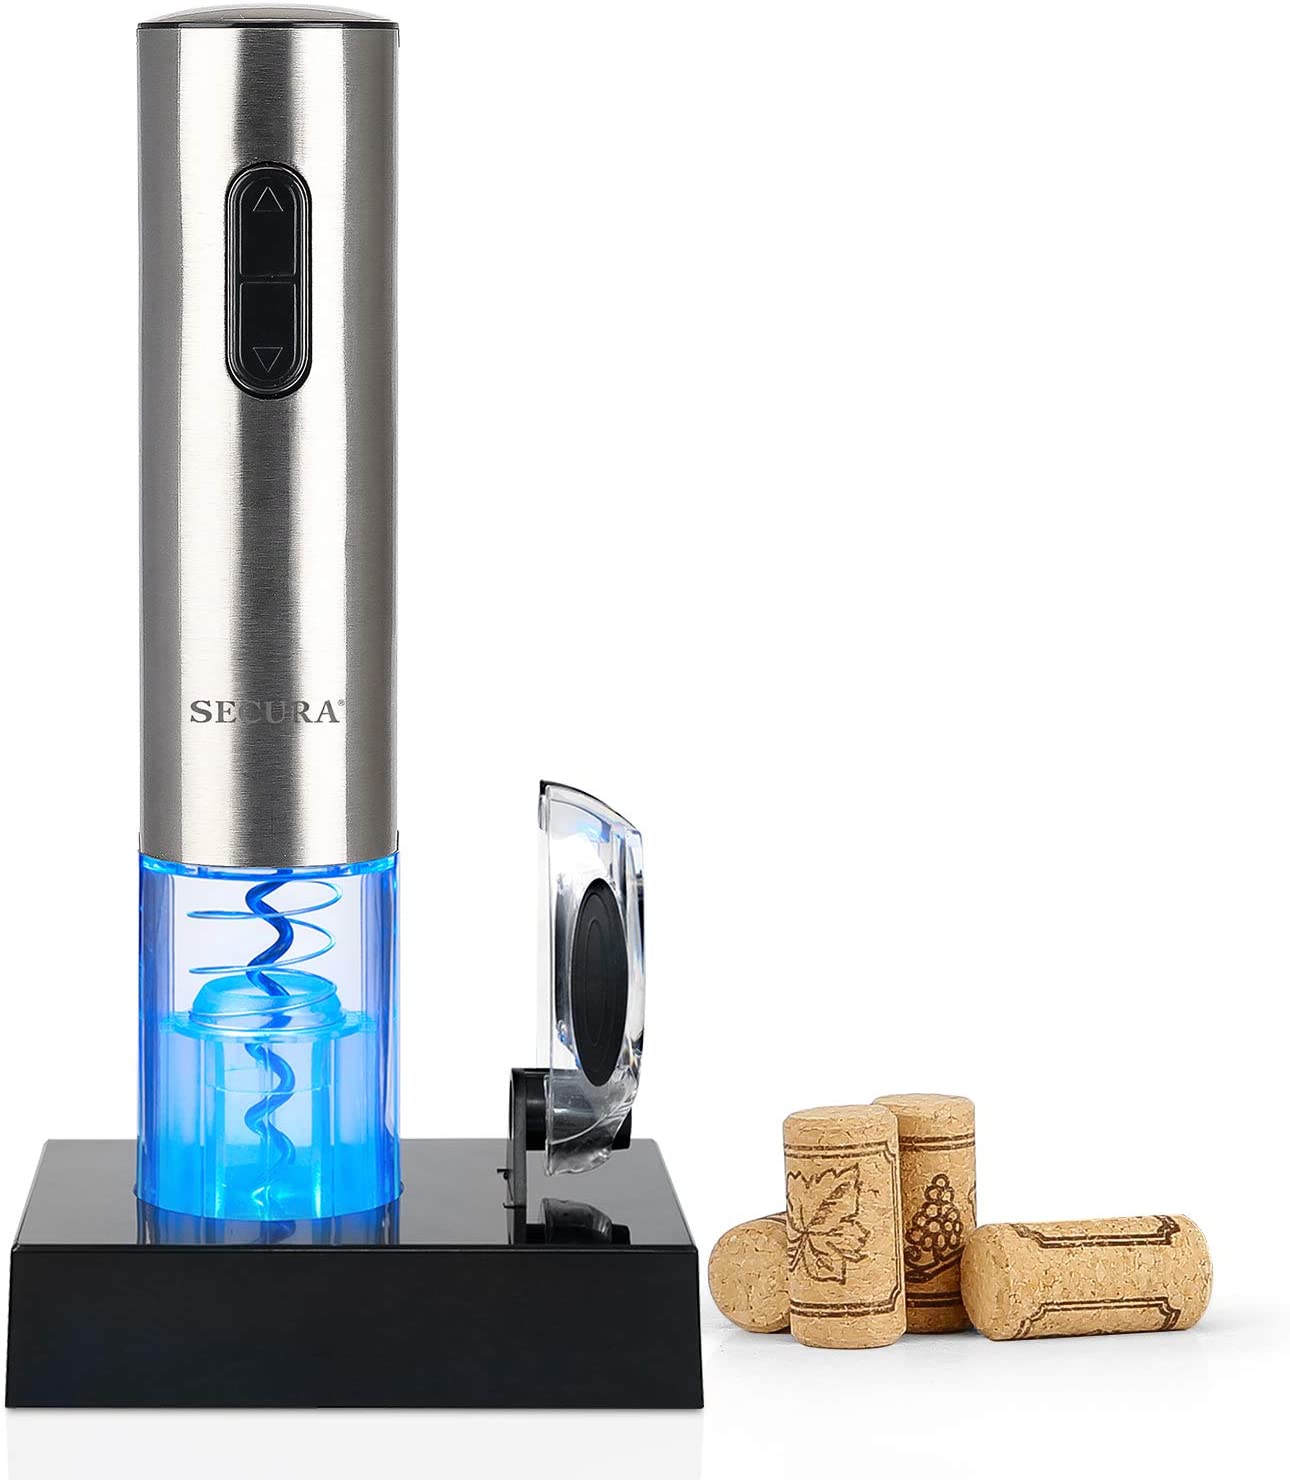 Secura Electric Wine Bottle Opener with Foil Cutter